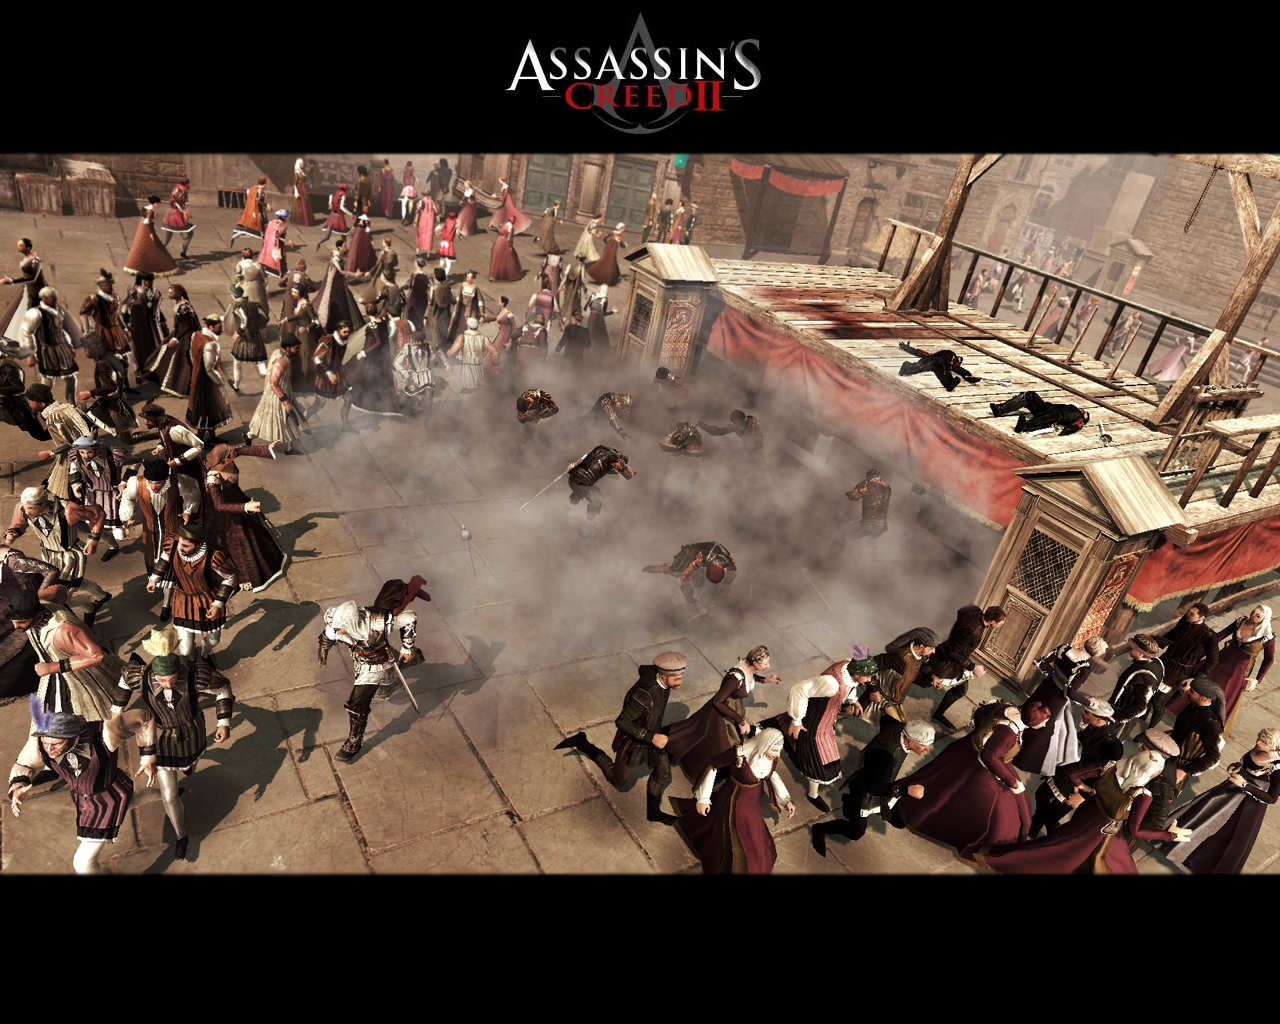 Games assassin creed 2. Assassin s Creed II: Discovery. Assassin’s Creed 2 (2009). Ассасин Крид 2 Скриншоты. Assassin's Creed 2 Скриншоты.